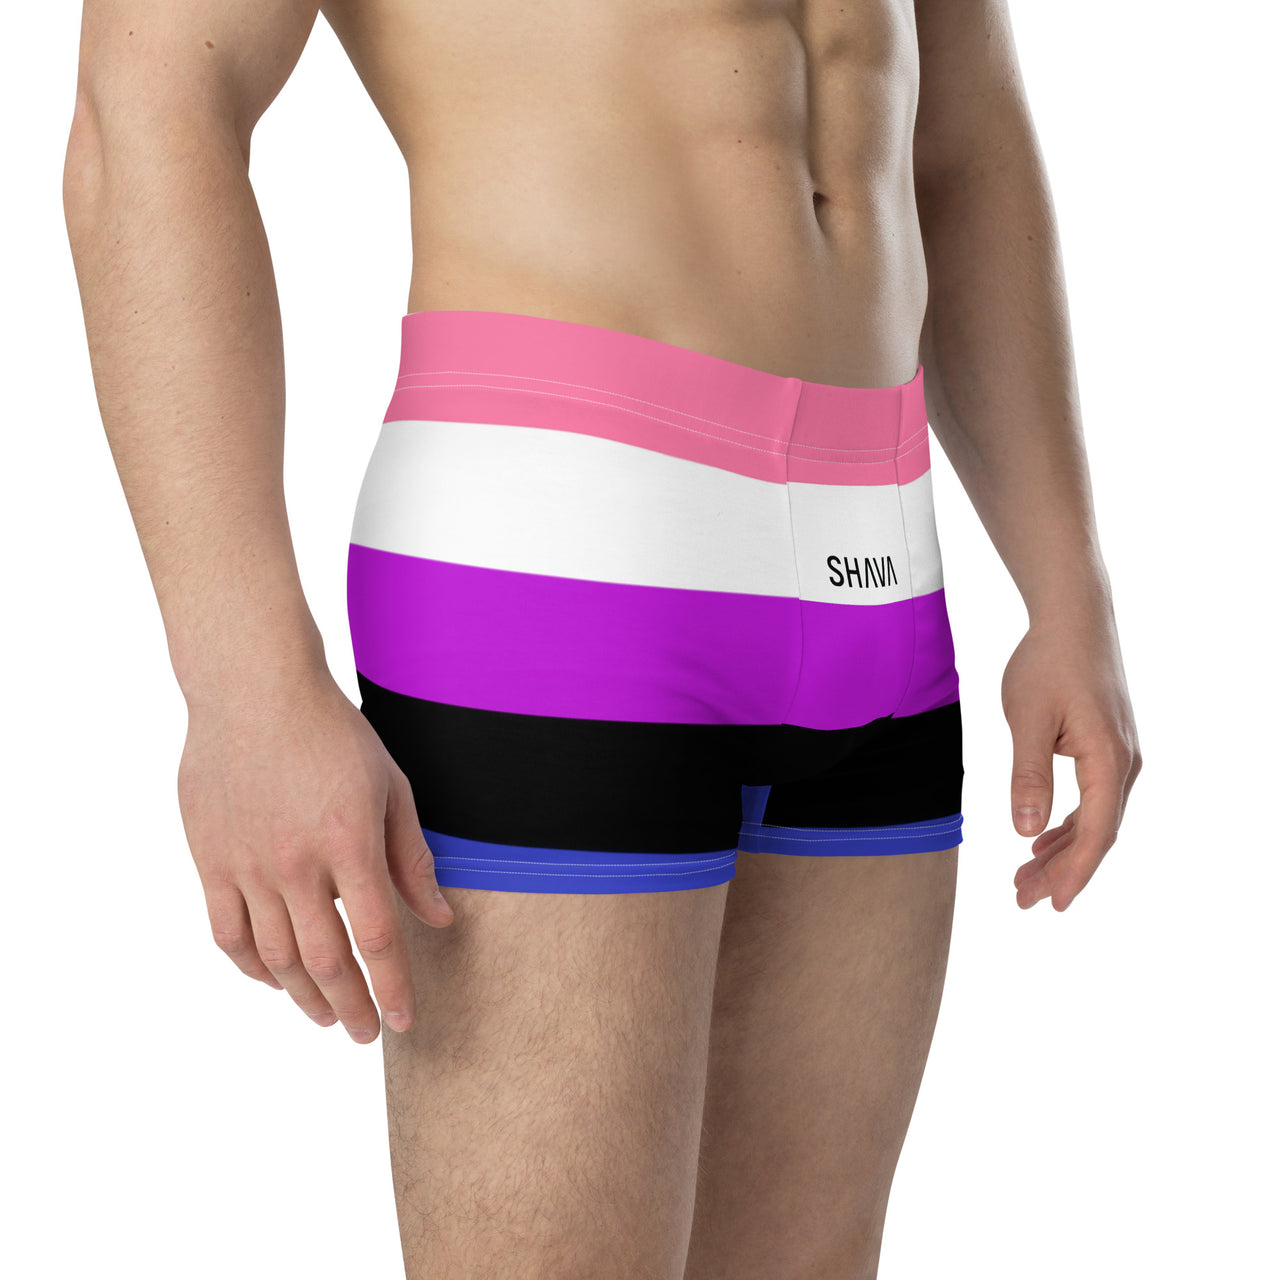 Genderfluid Flag LGBTQ Boxer for Her/Him or They/Them SHAVA